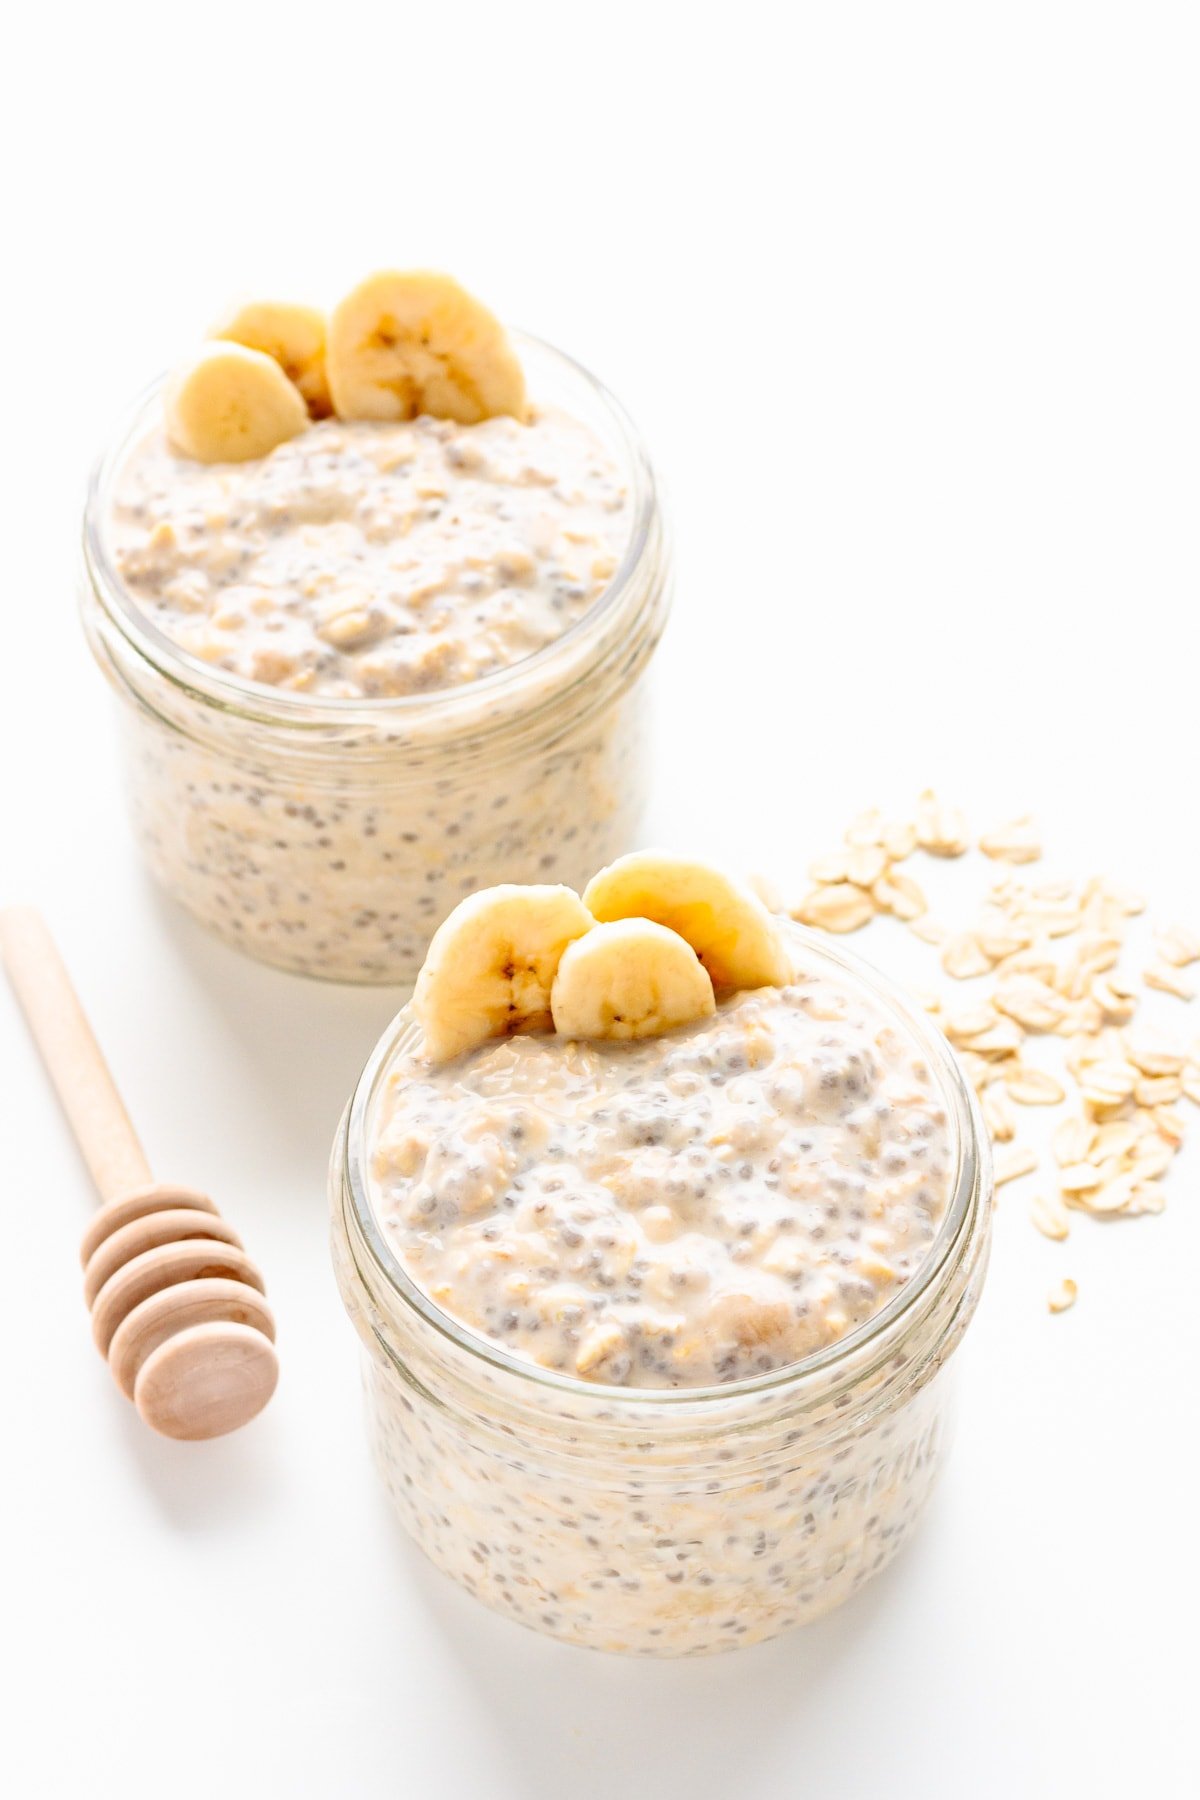 Two jars of banana overnight oats garnished with banana slices with a honey dipper and some rolled oats beside them.